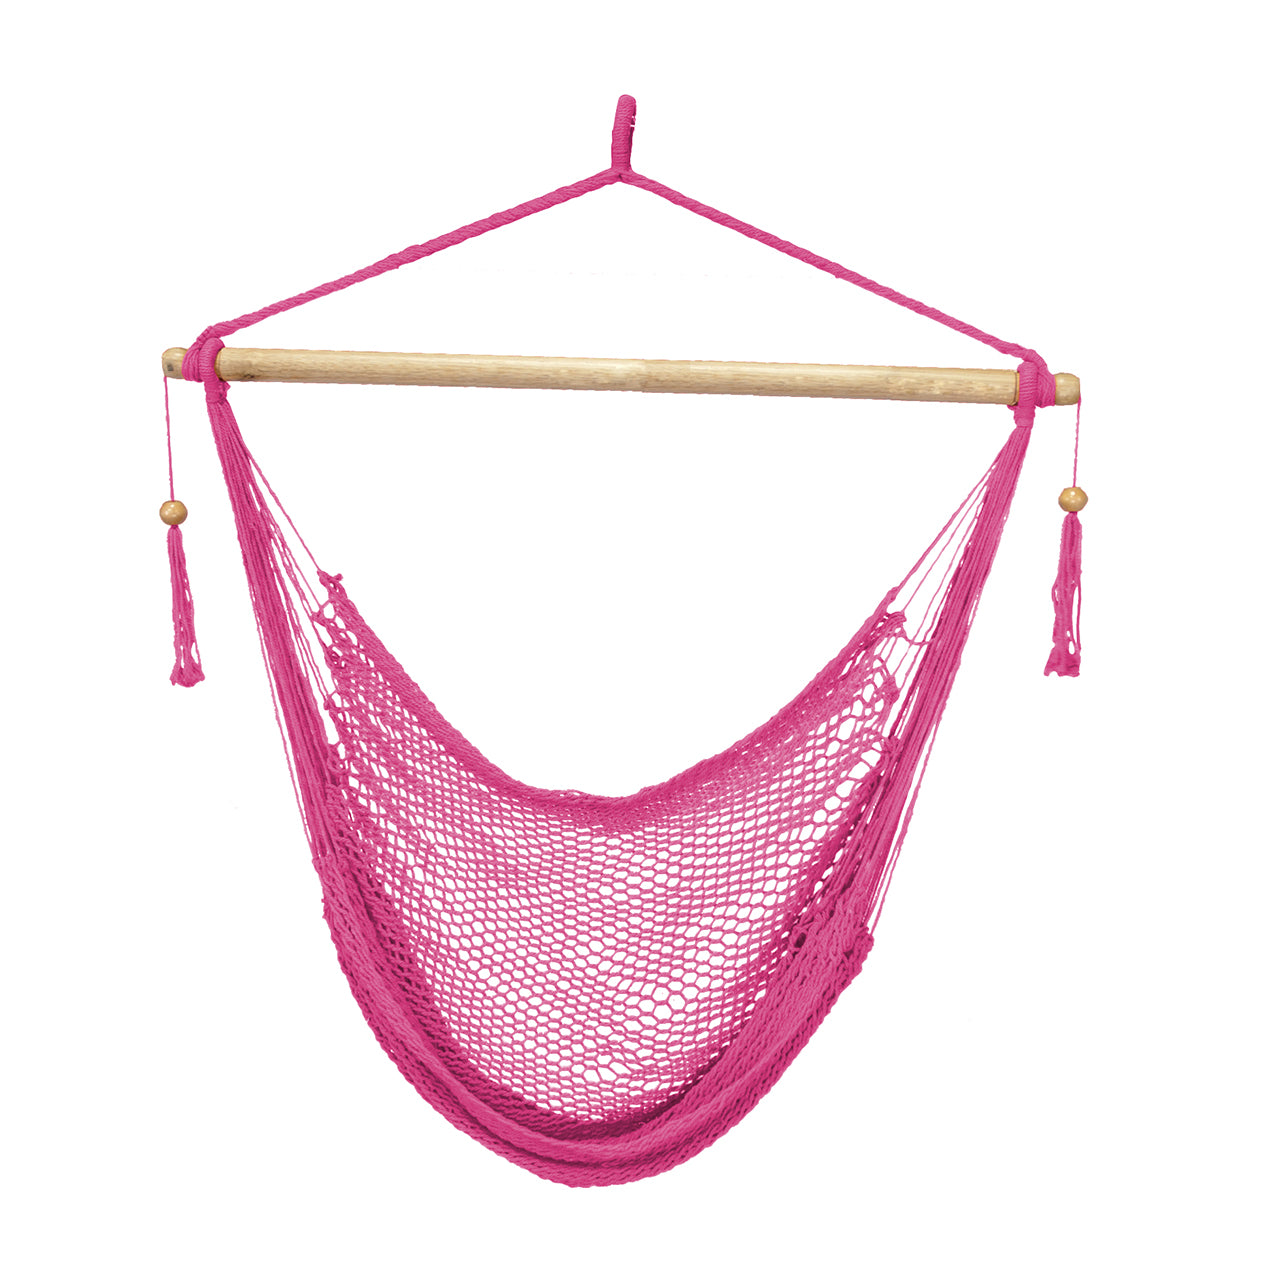 Bliss Hammocks 40-inch Island Rope Hammock Chair with Hanging Hardware and Spreader Bar in the pink variation.